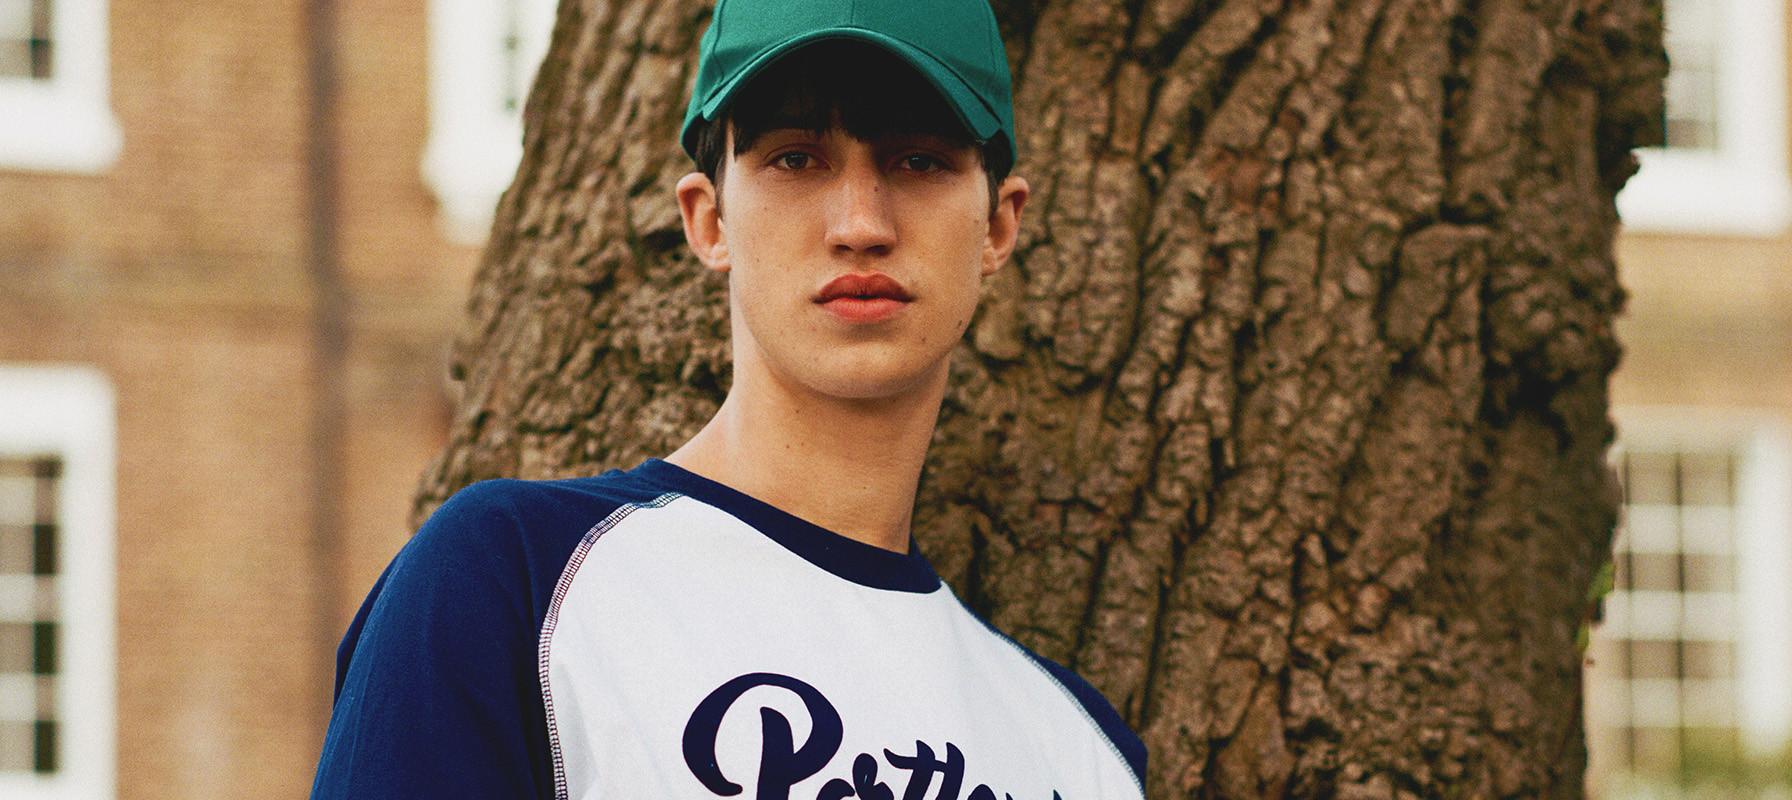 Man wearing a green cap and navy and white ringer tee